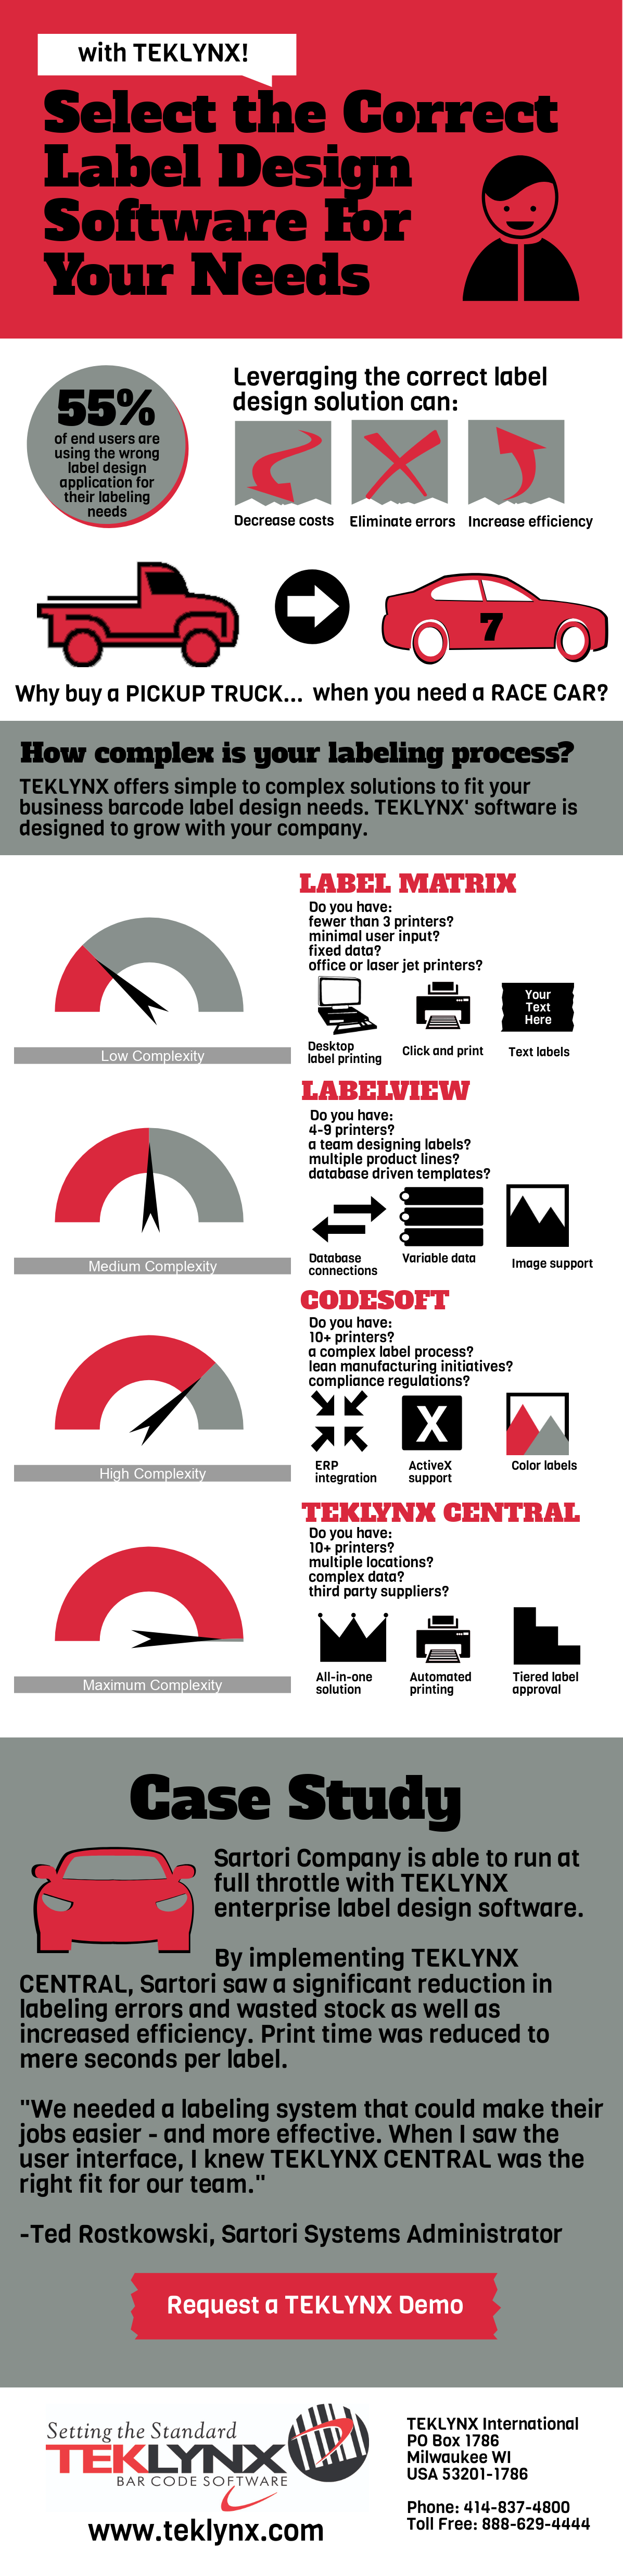 Free Infographic on Selecting the Correct Label Design Software